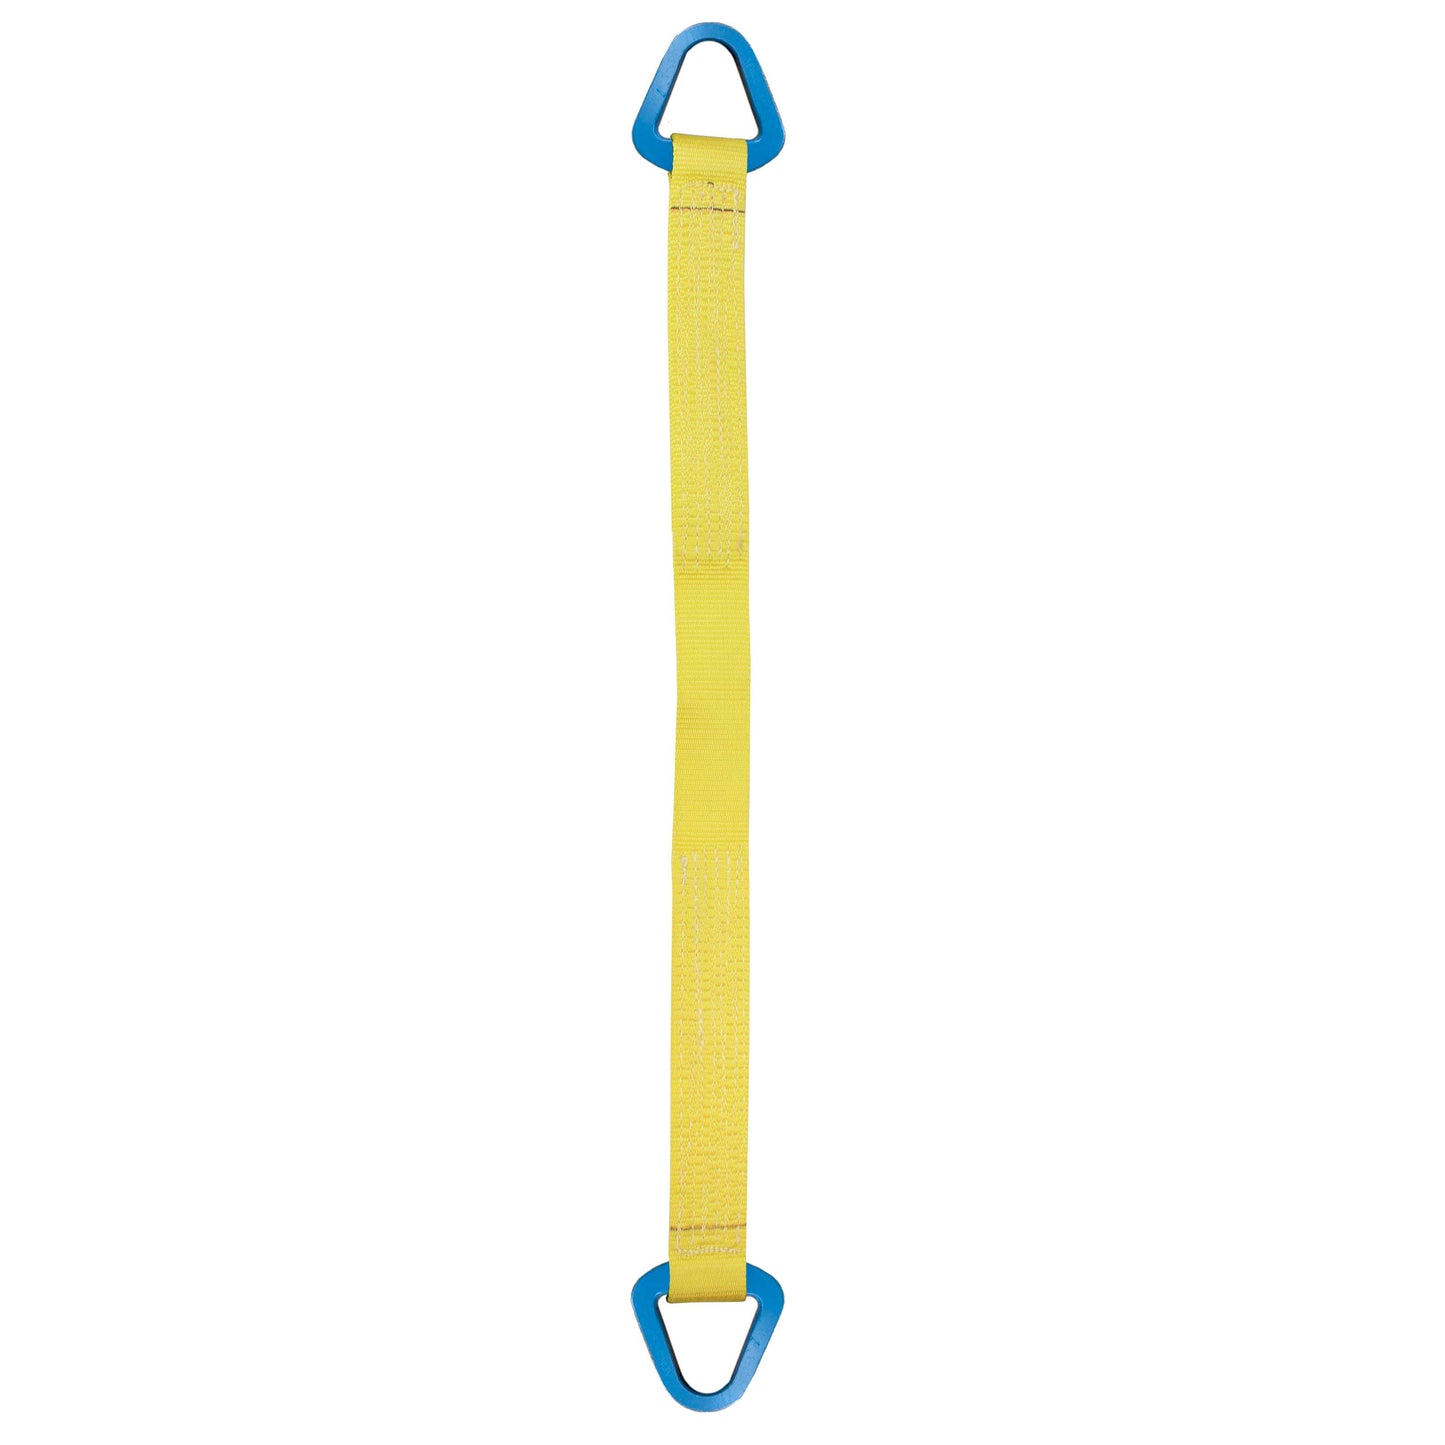 Nylon Lifting Sling Triangle 2 inch x 8 foot 1ply image 1 of 2